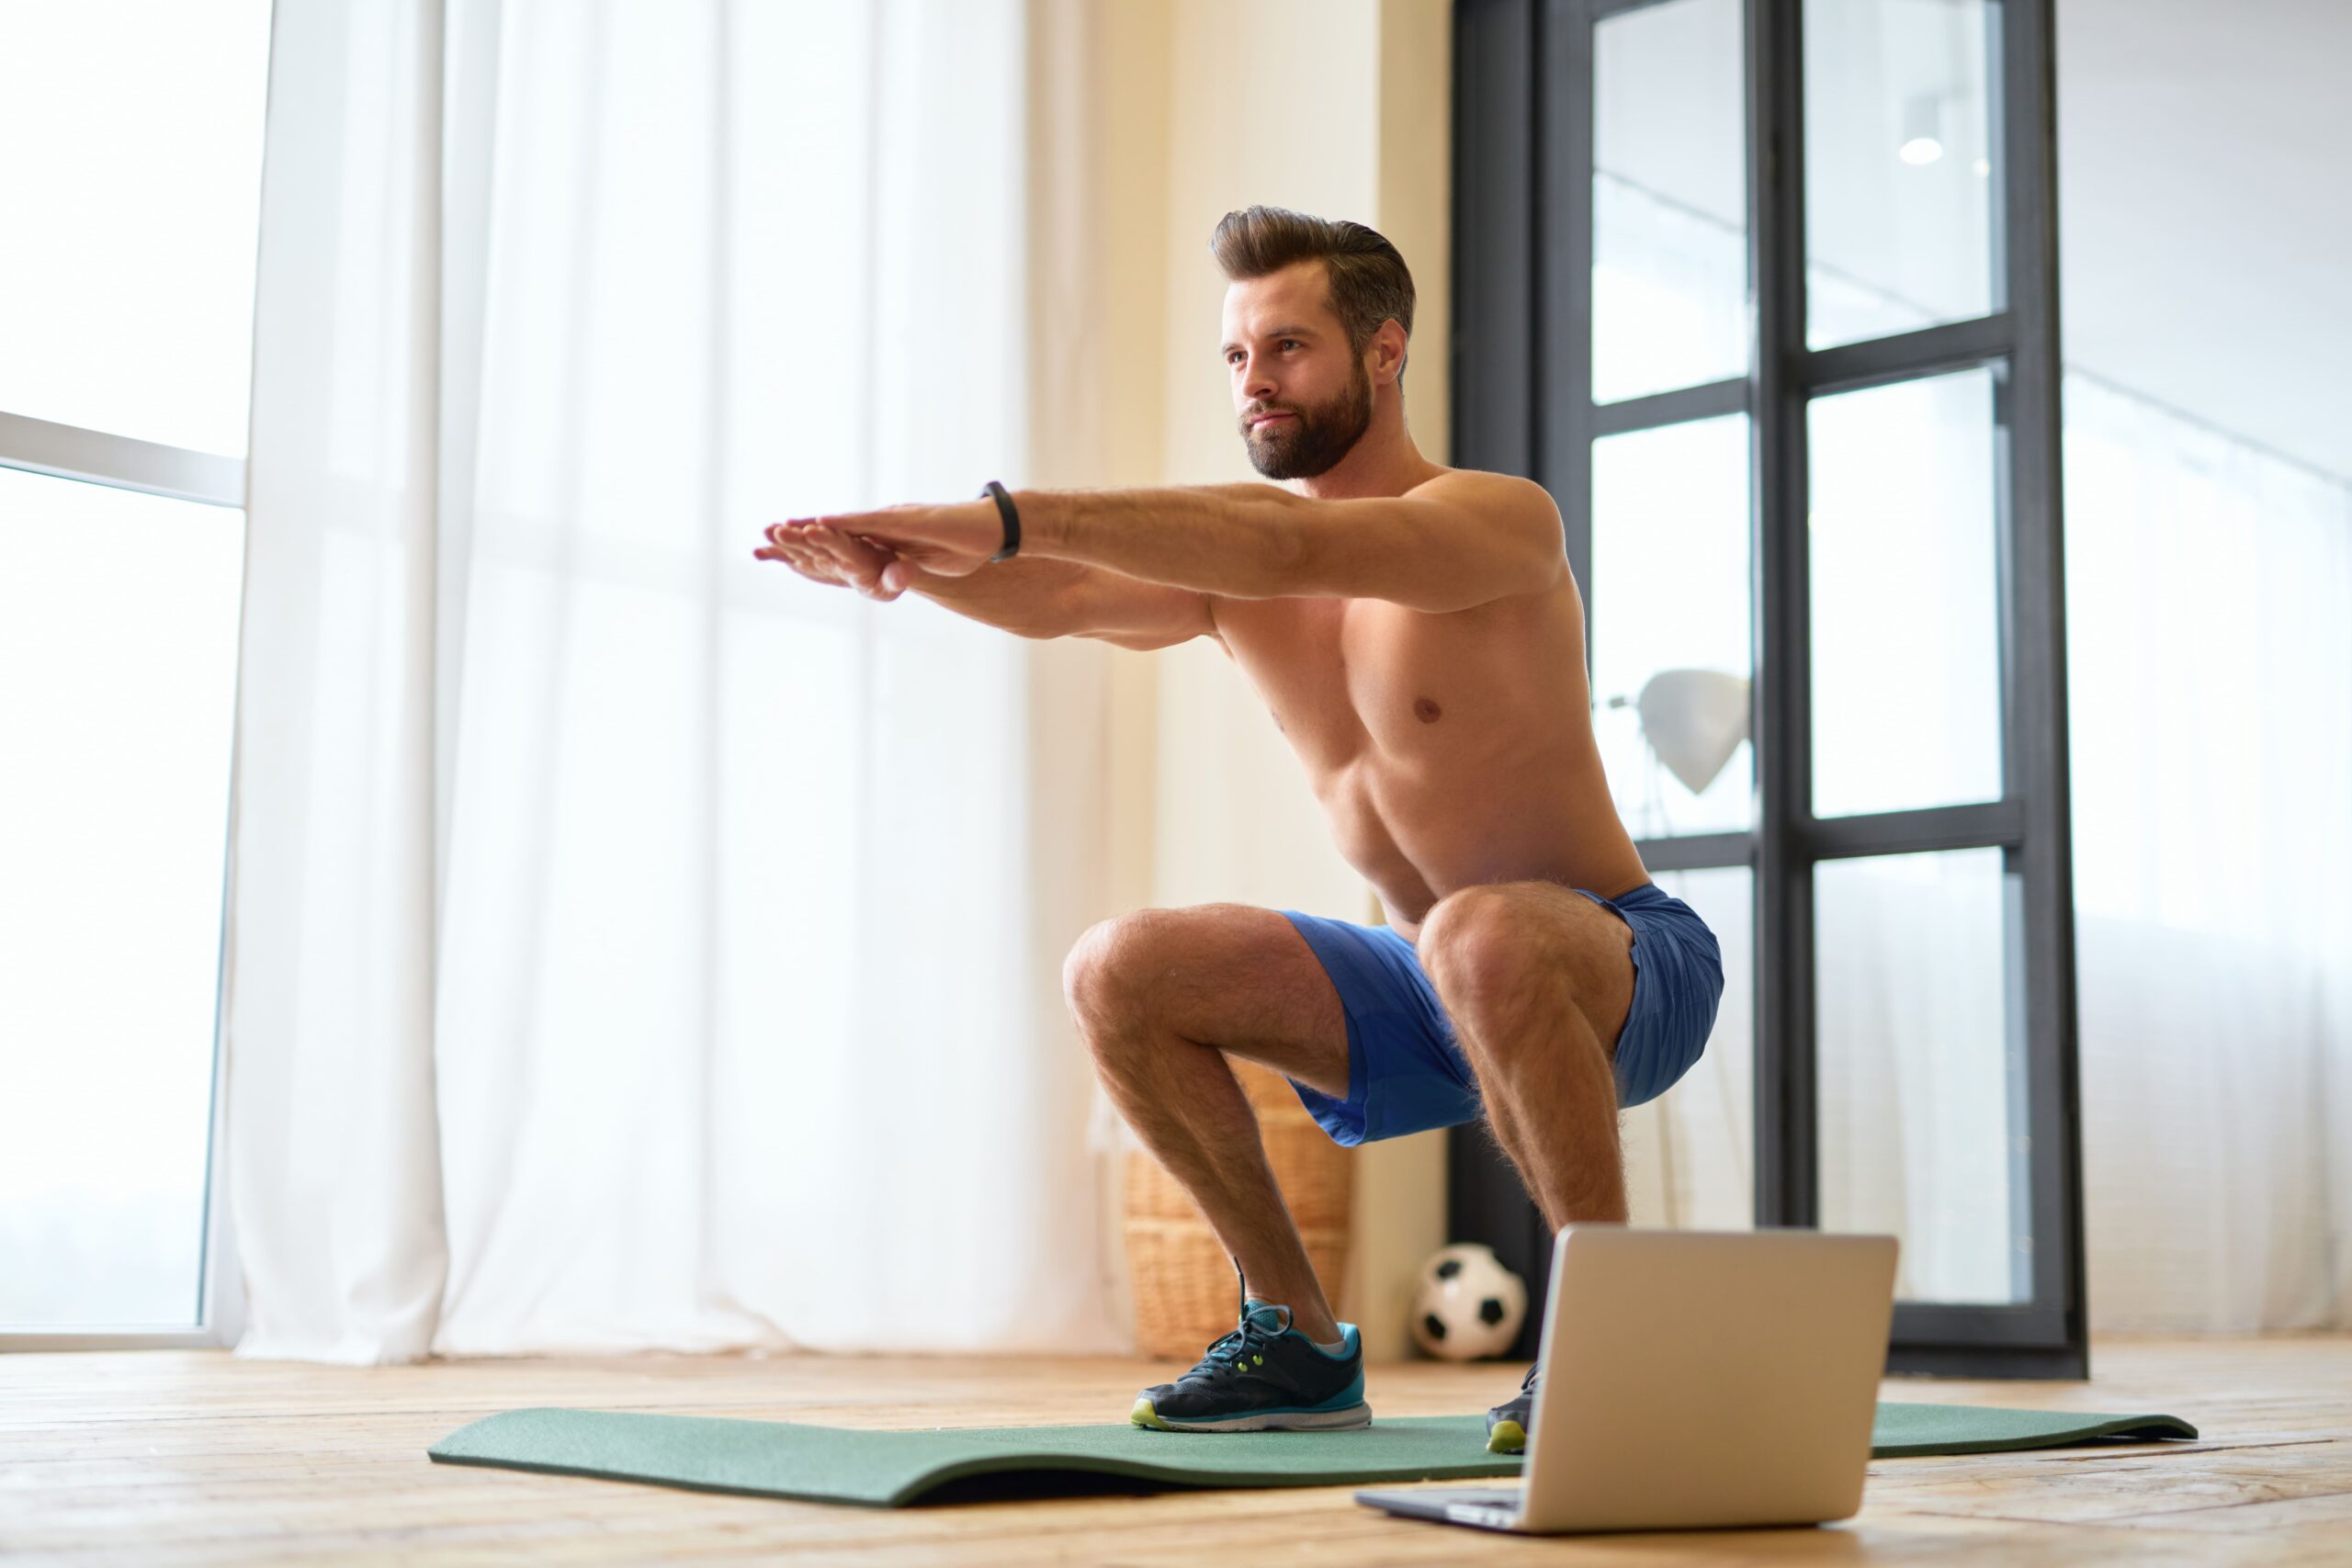 The best strategies for your home workout